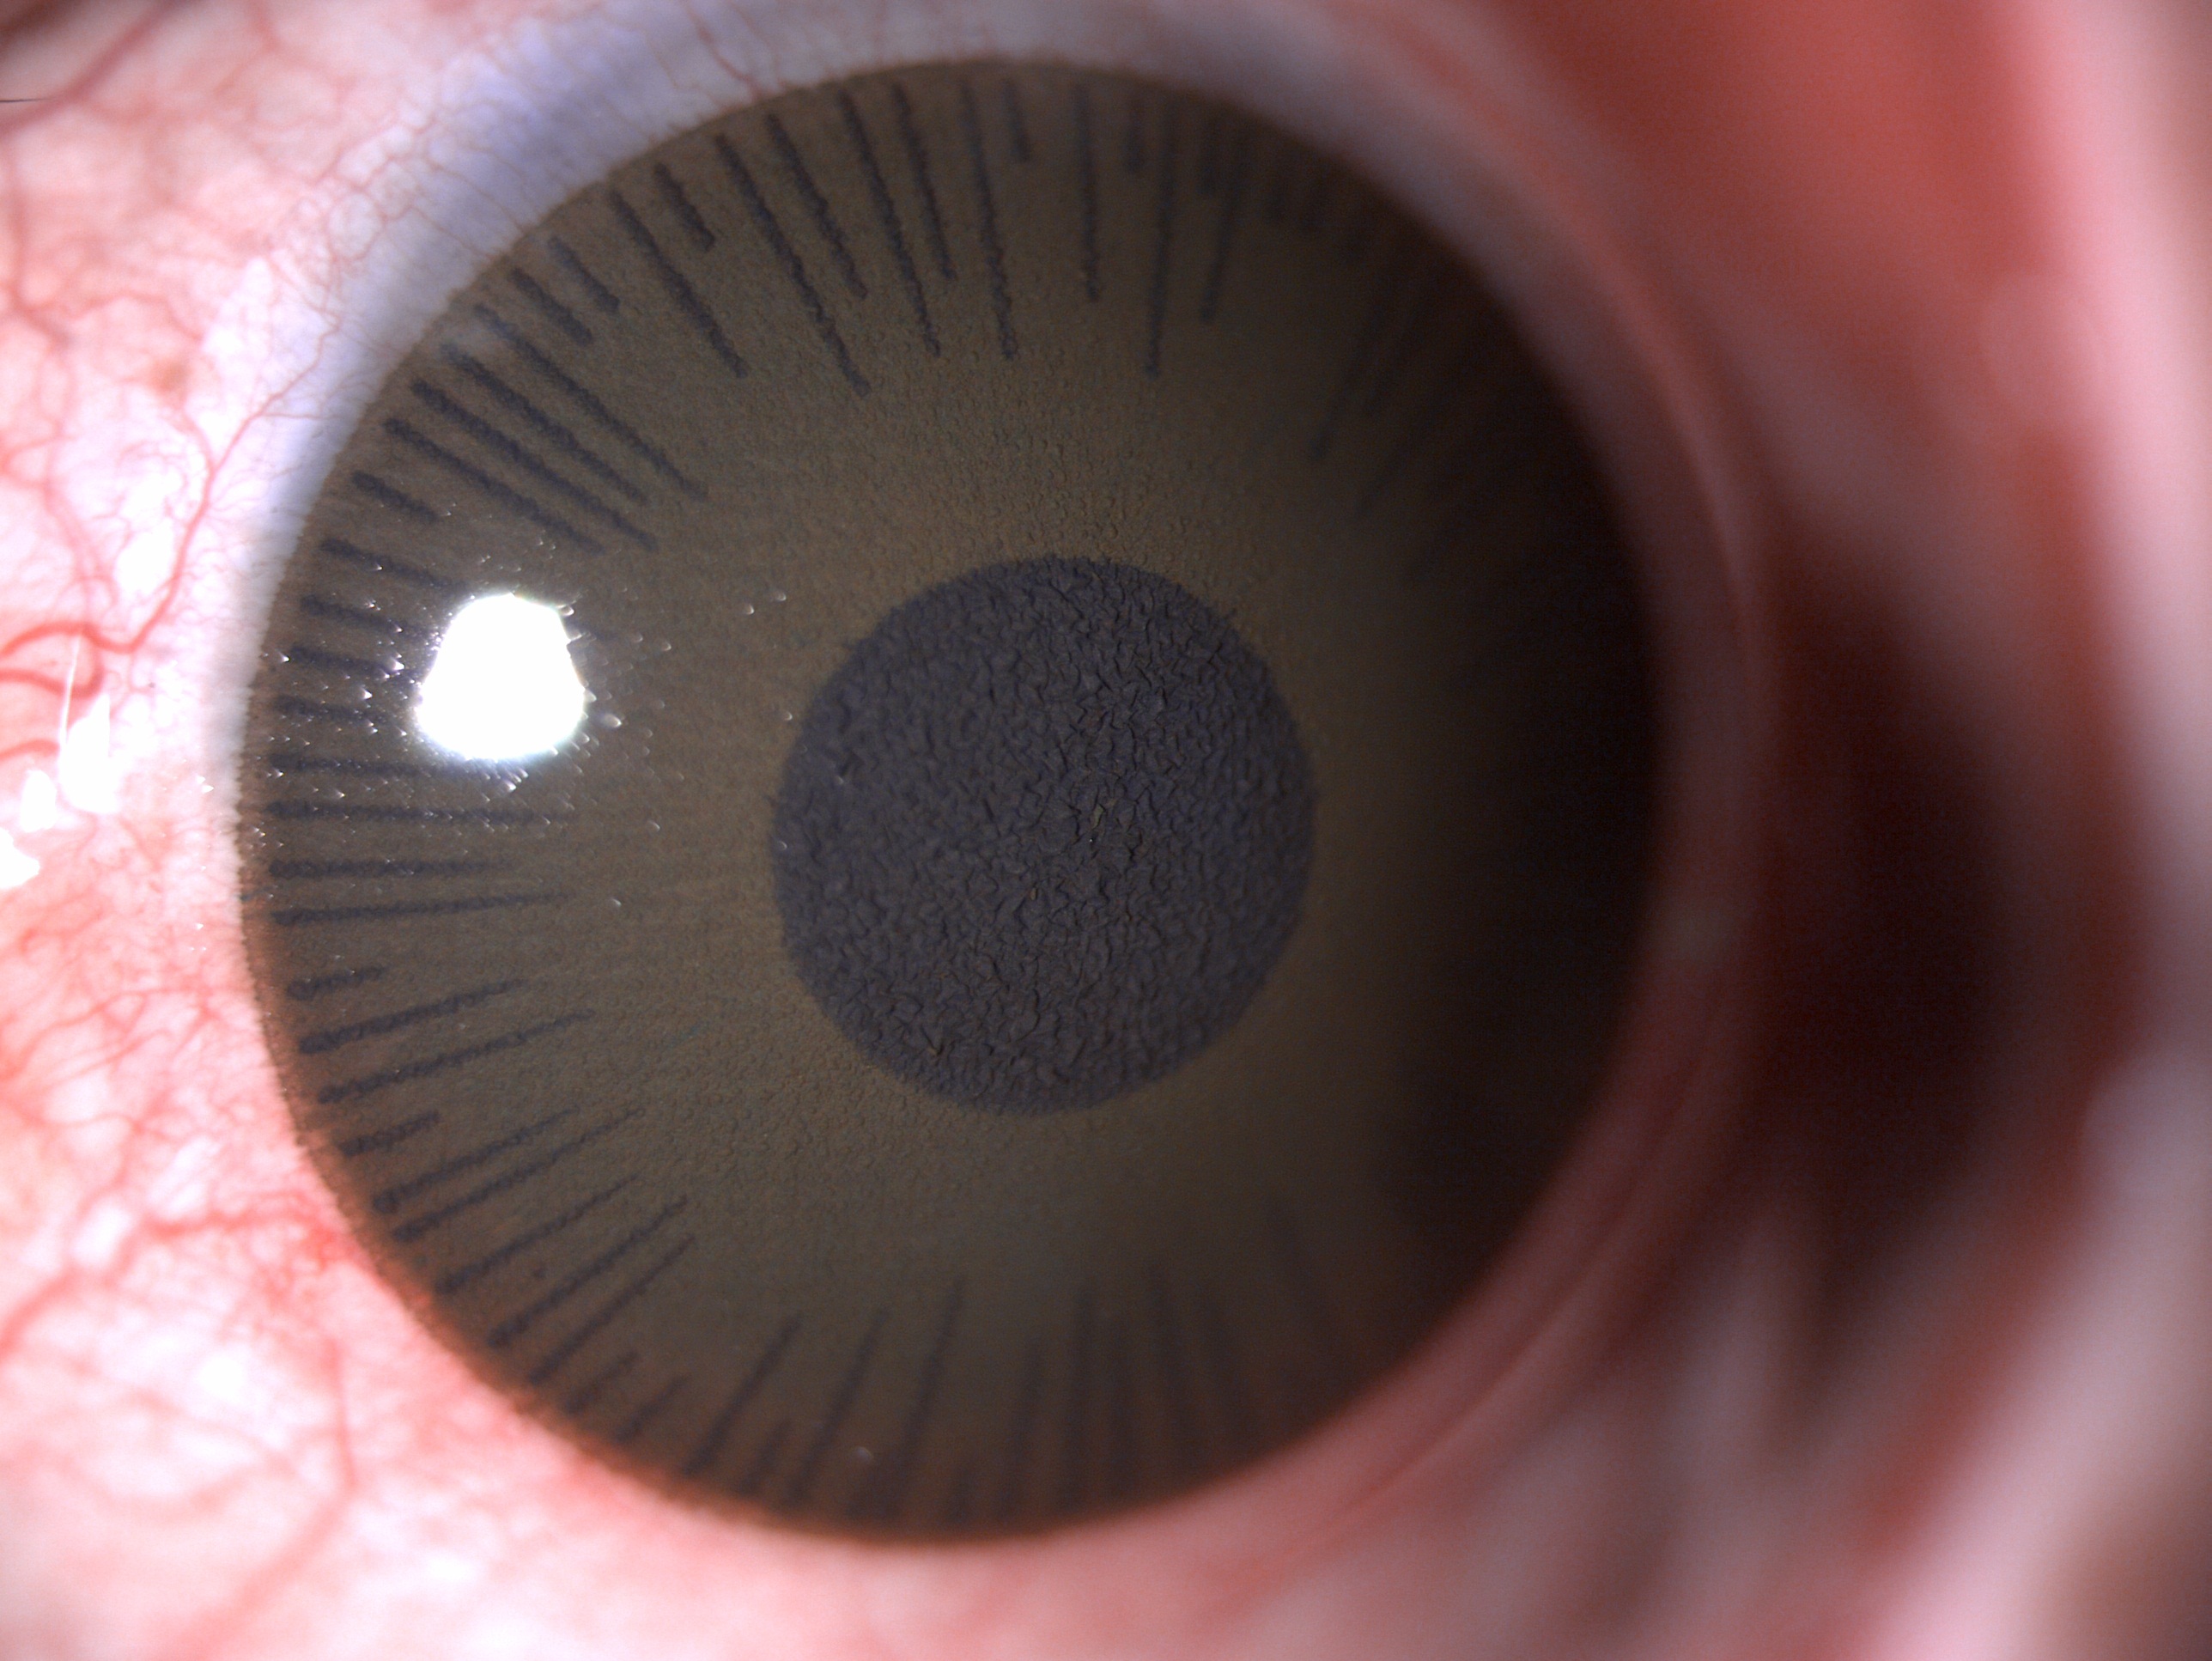 Digital image depicting a cosmetic contact lens in a patient with leucomatous corneal opacity